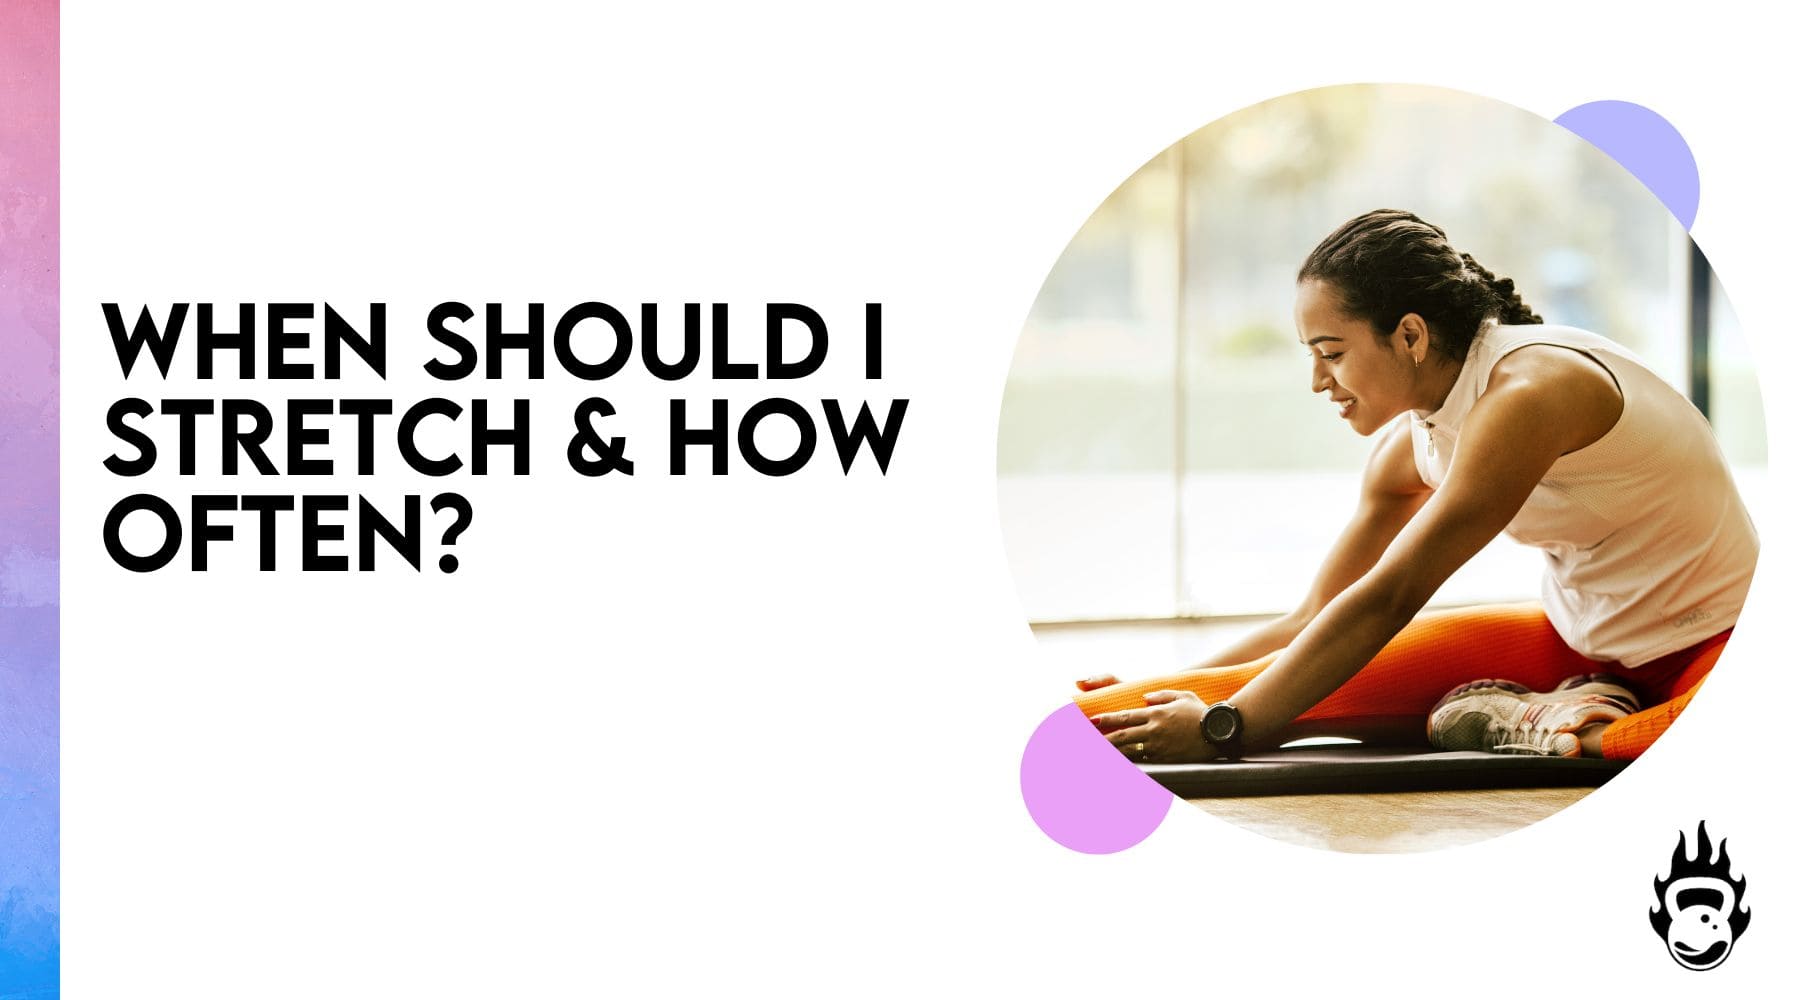 When Should I Stretch & How Often